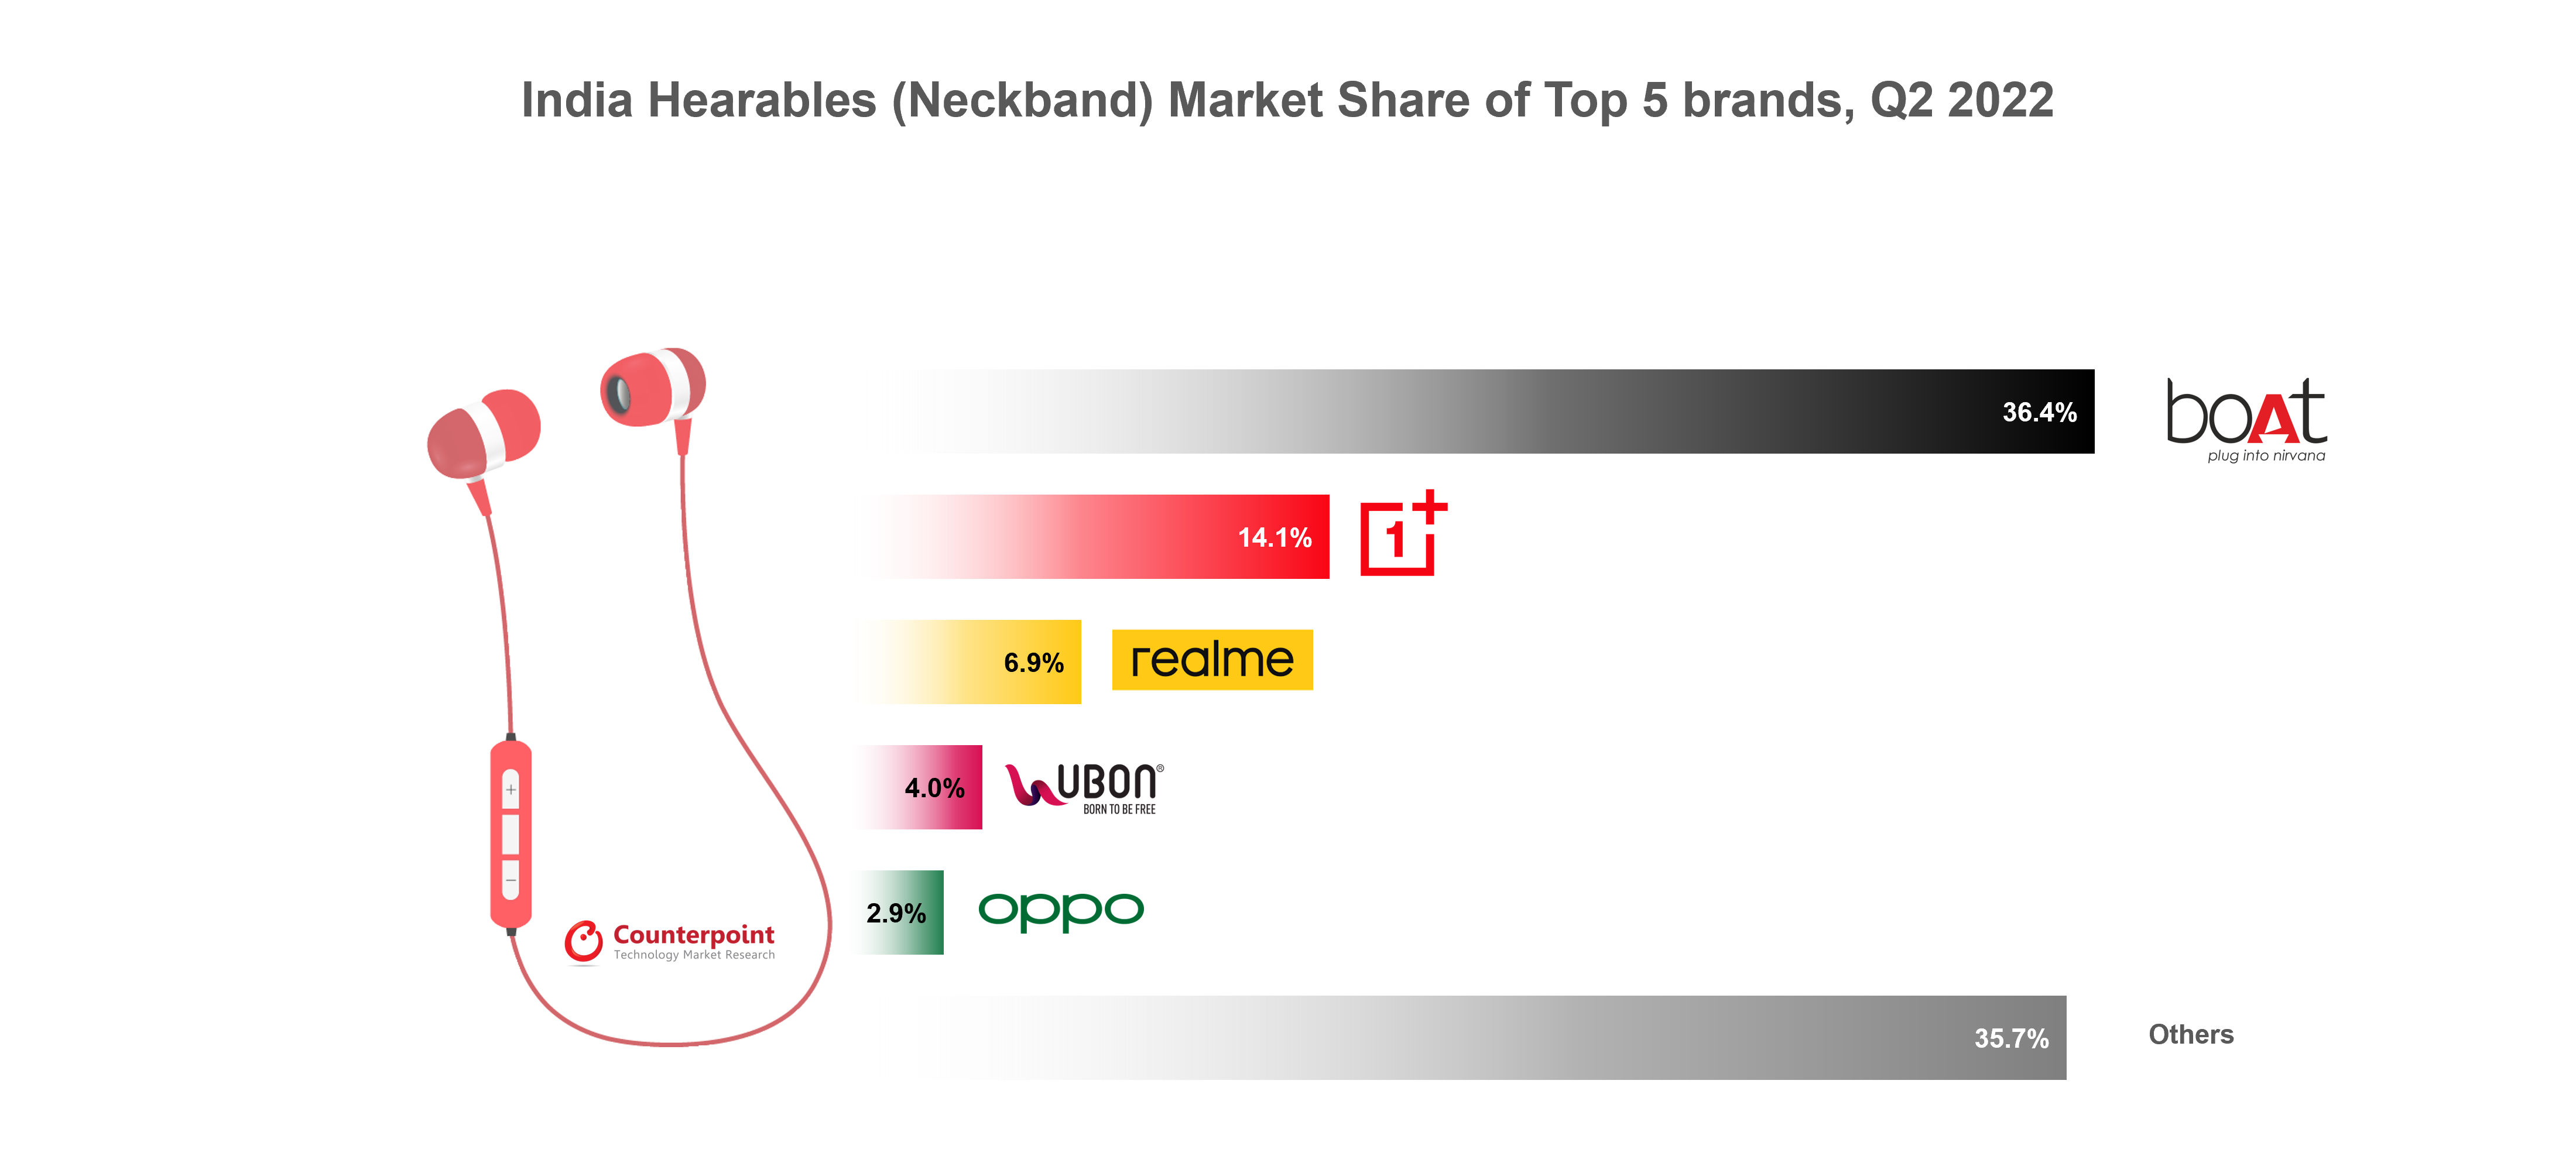 India Hearables (Neckband) Market Share of Top 5 Brands, Q2 2022